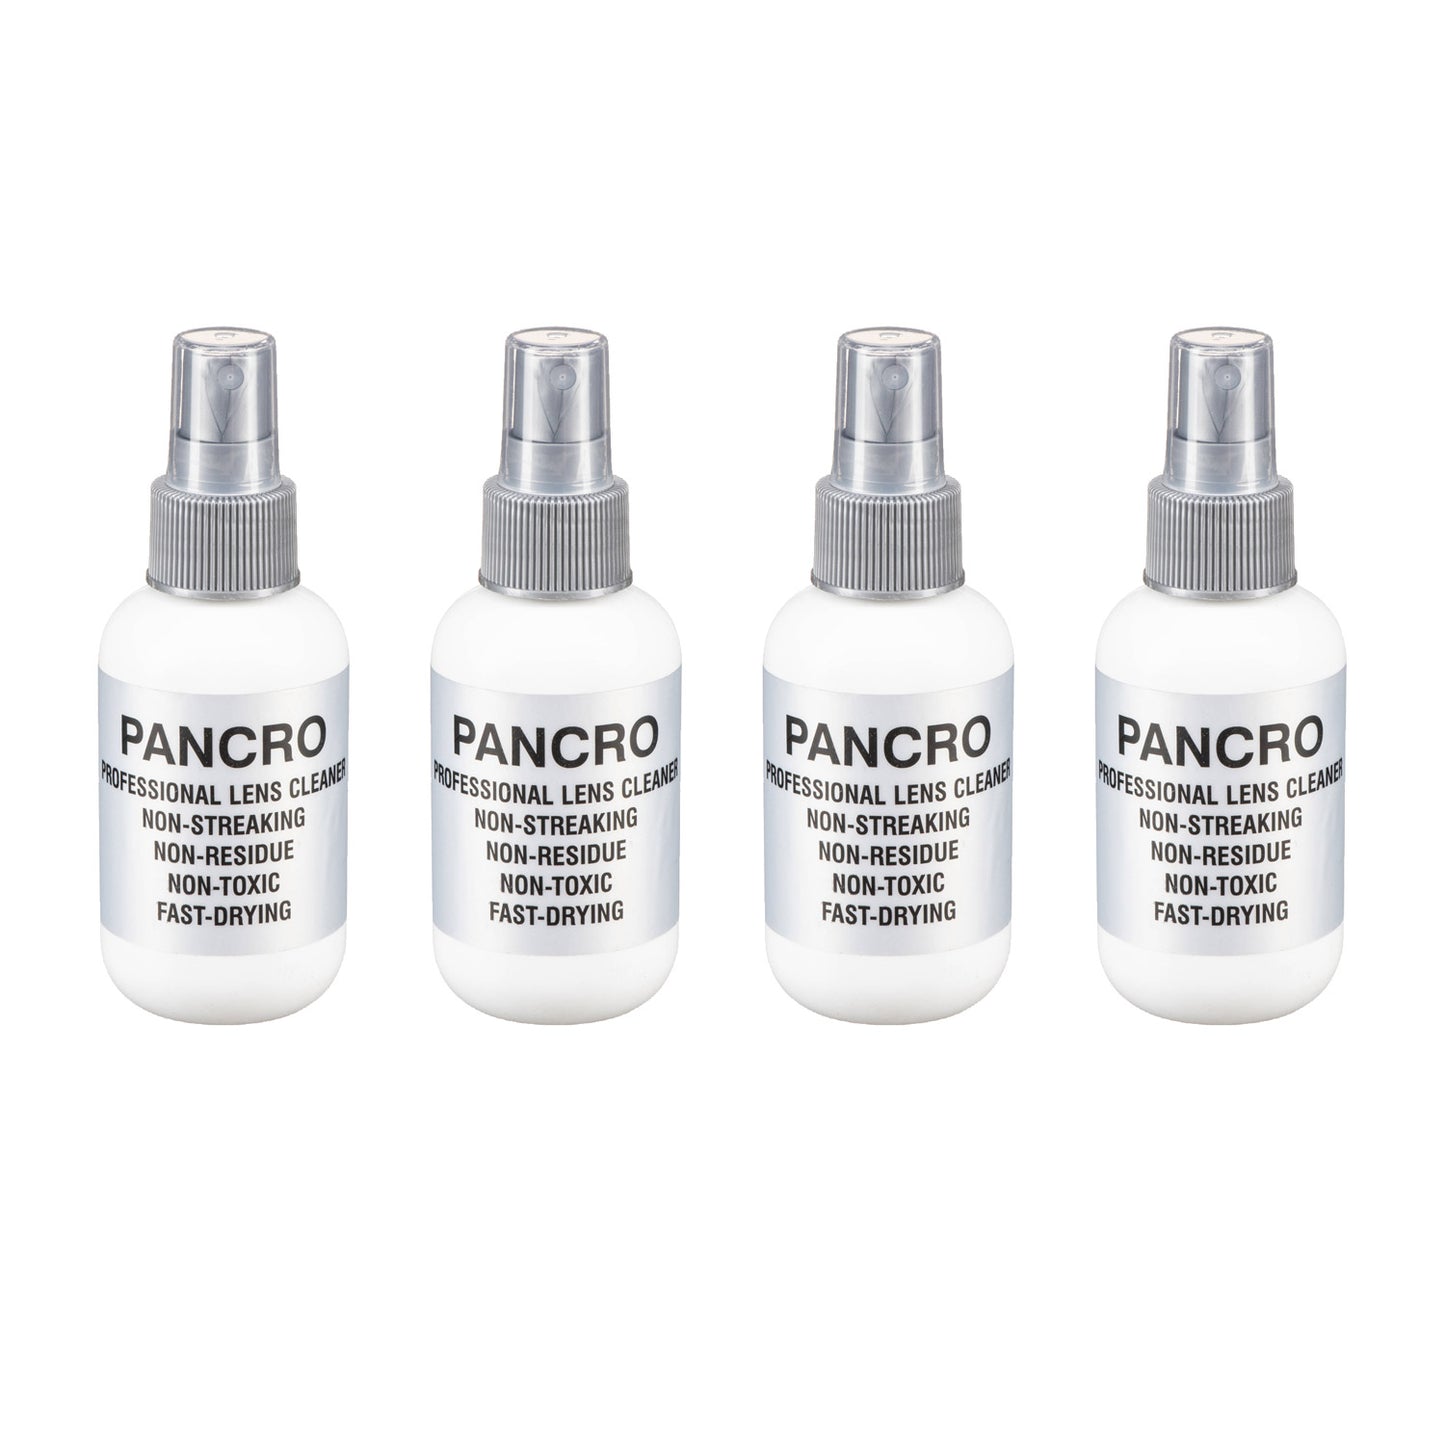 Pancro Professional Lens Cleaner - 4oz (4 Pack)